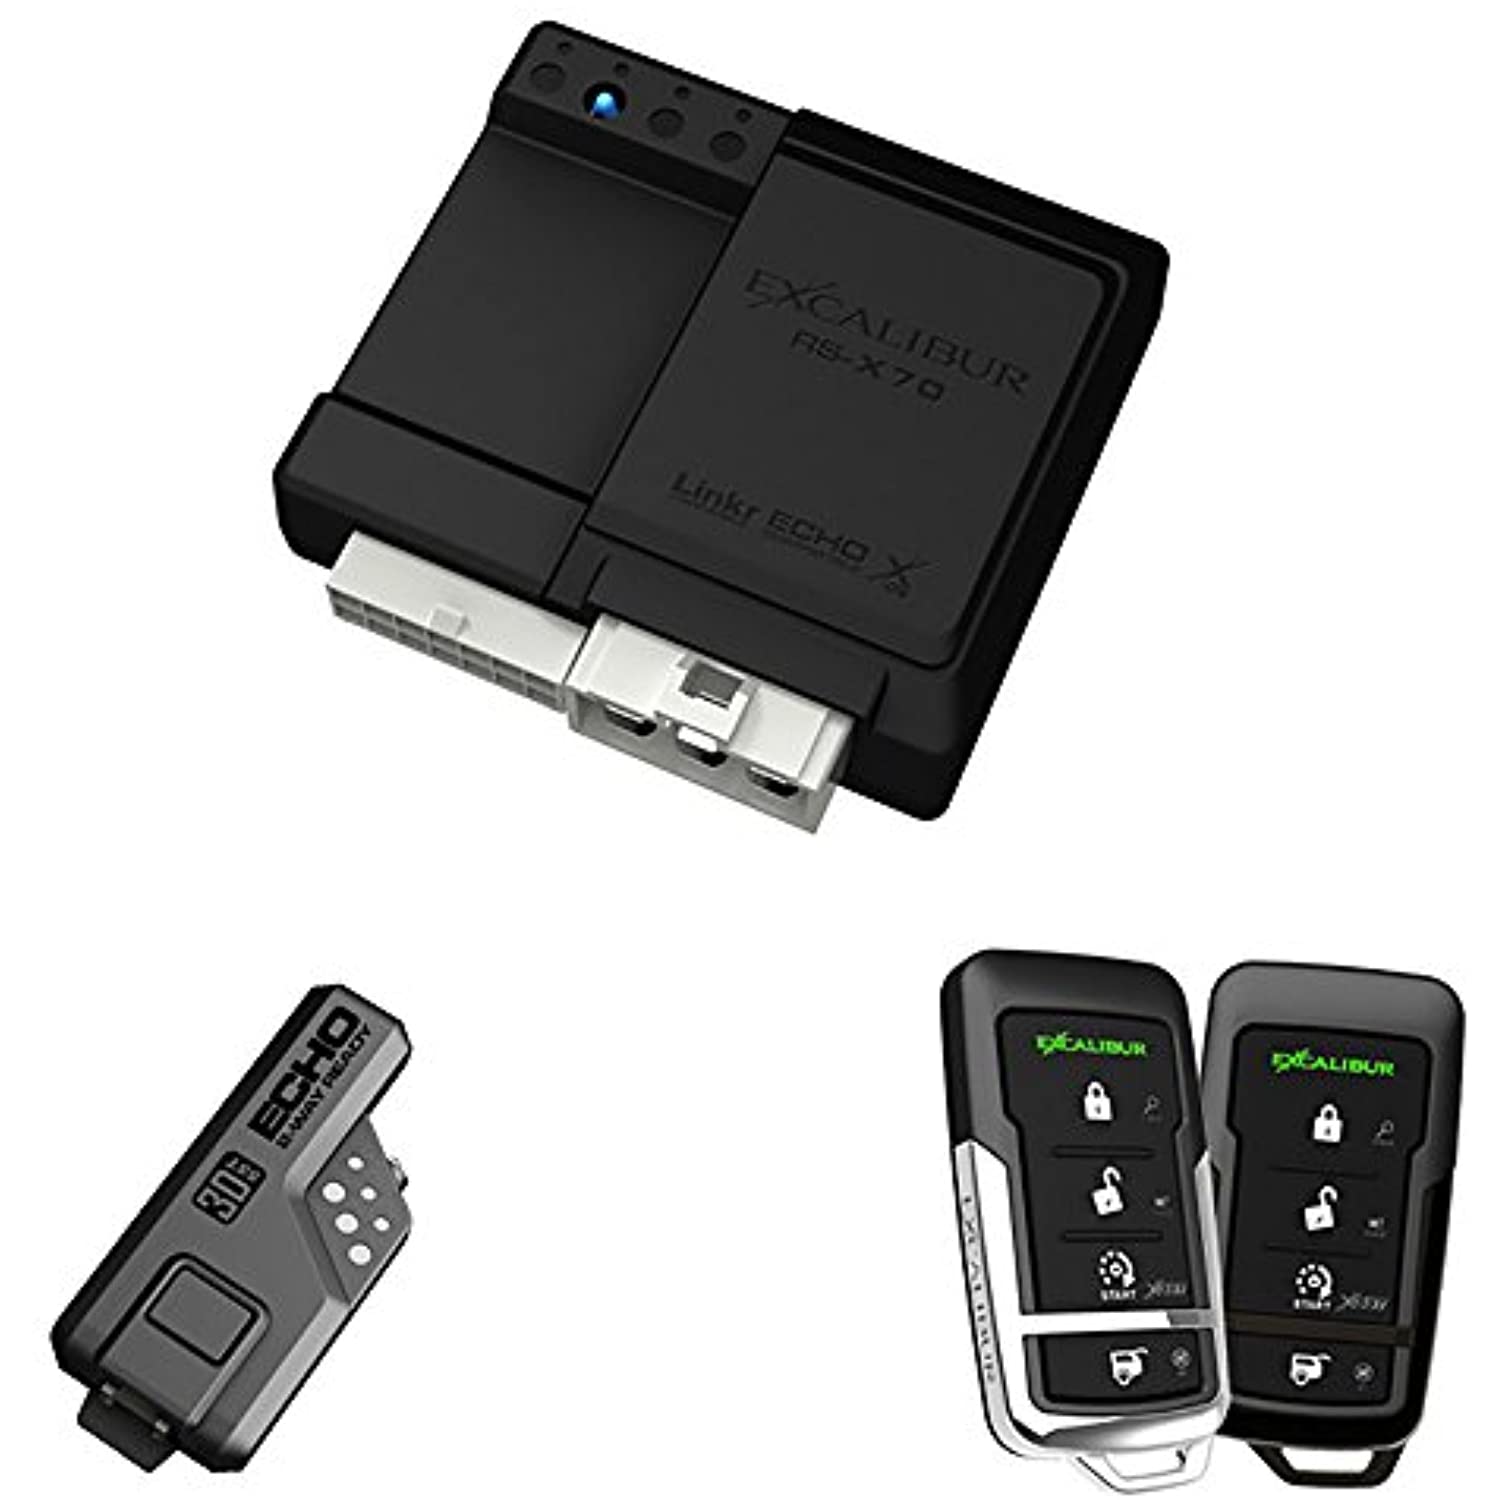 Excalibur RS3753DB 2-Way Paging Remote Start/Keyless Entry/Vehicle Security System (with 4 Button Remote and Sidekick Remote), 1 Pack